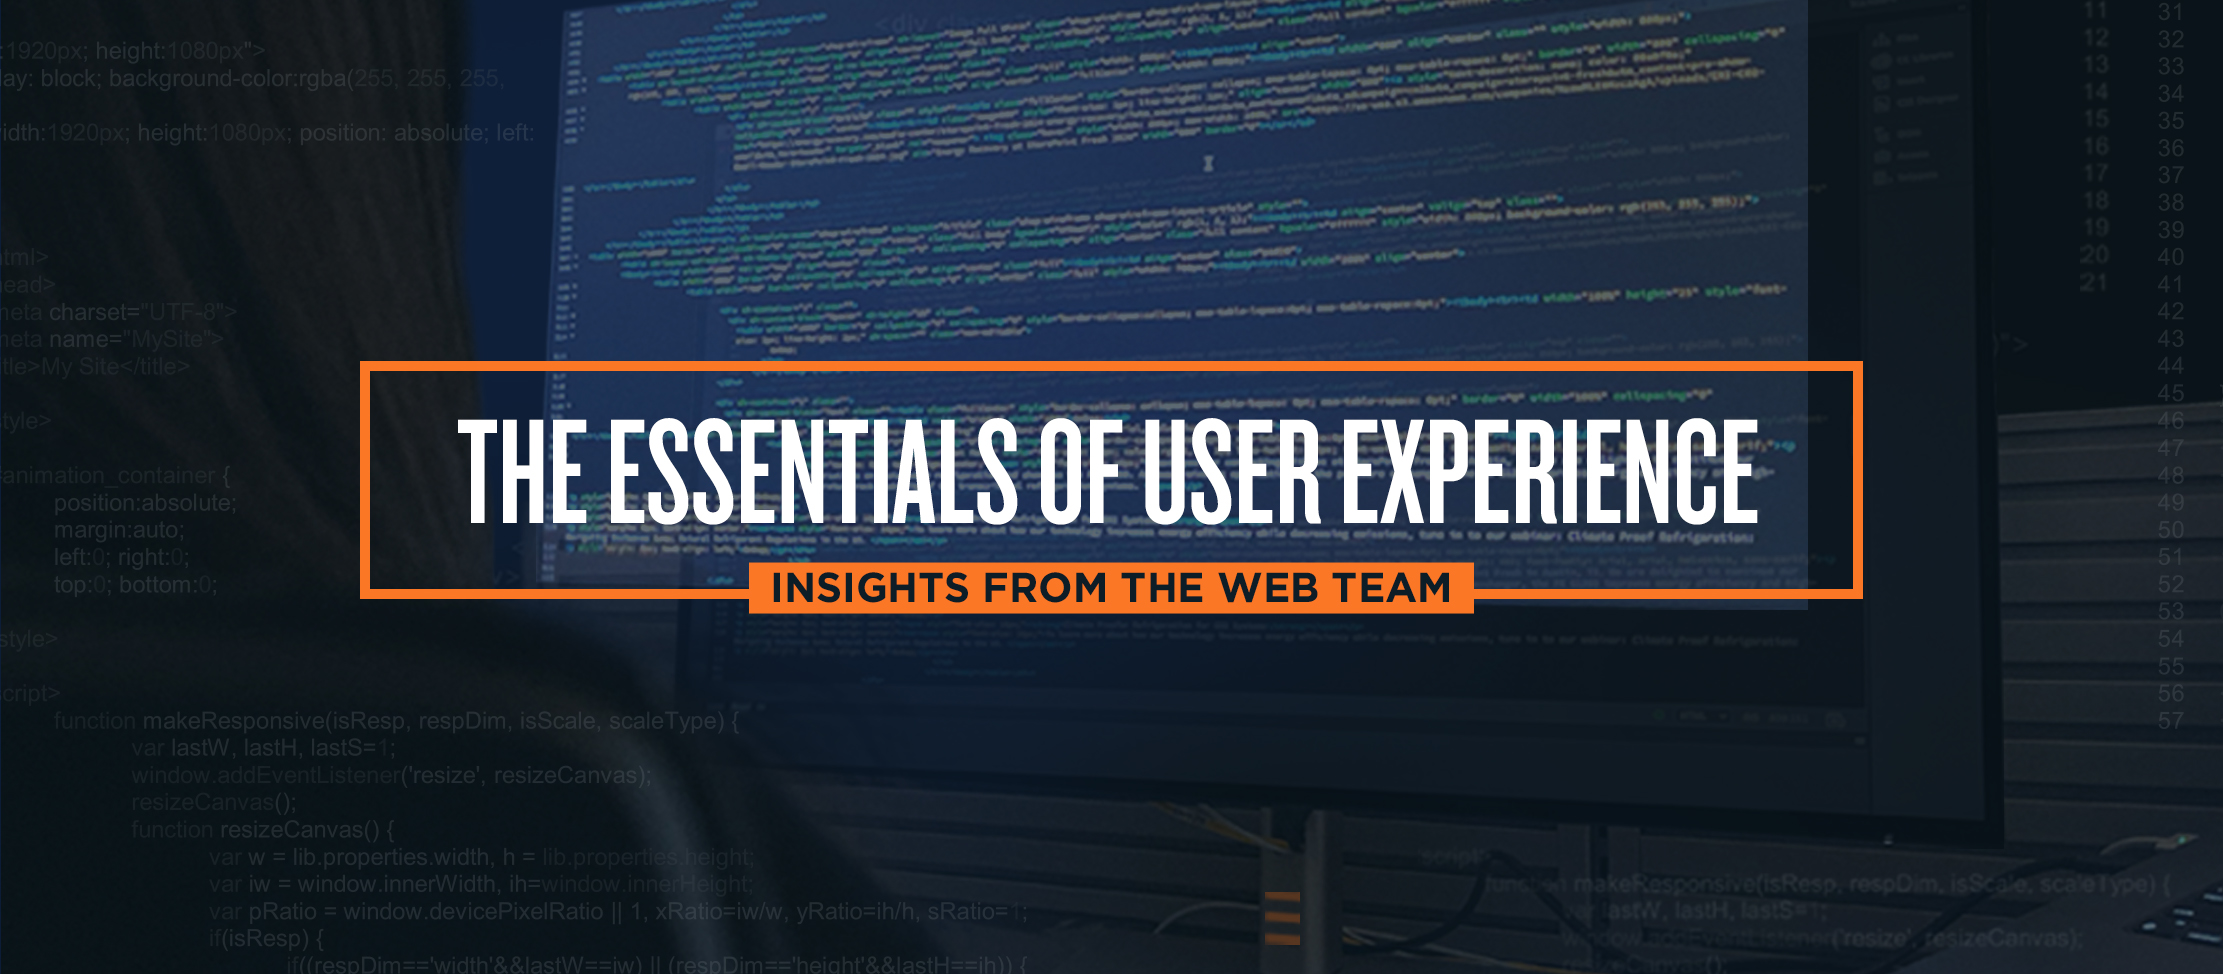 The essentials of user experience: Insights from the EPIC web team